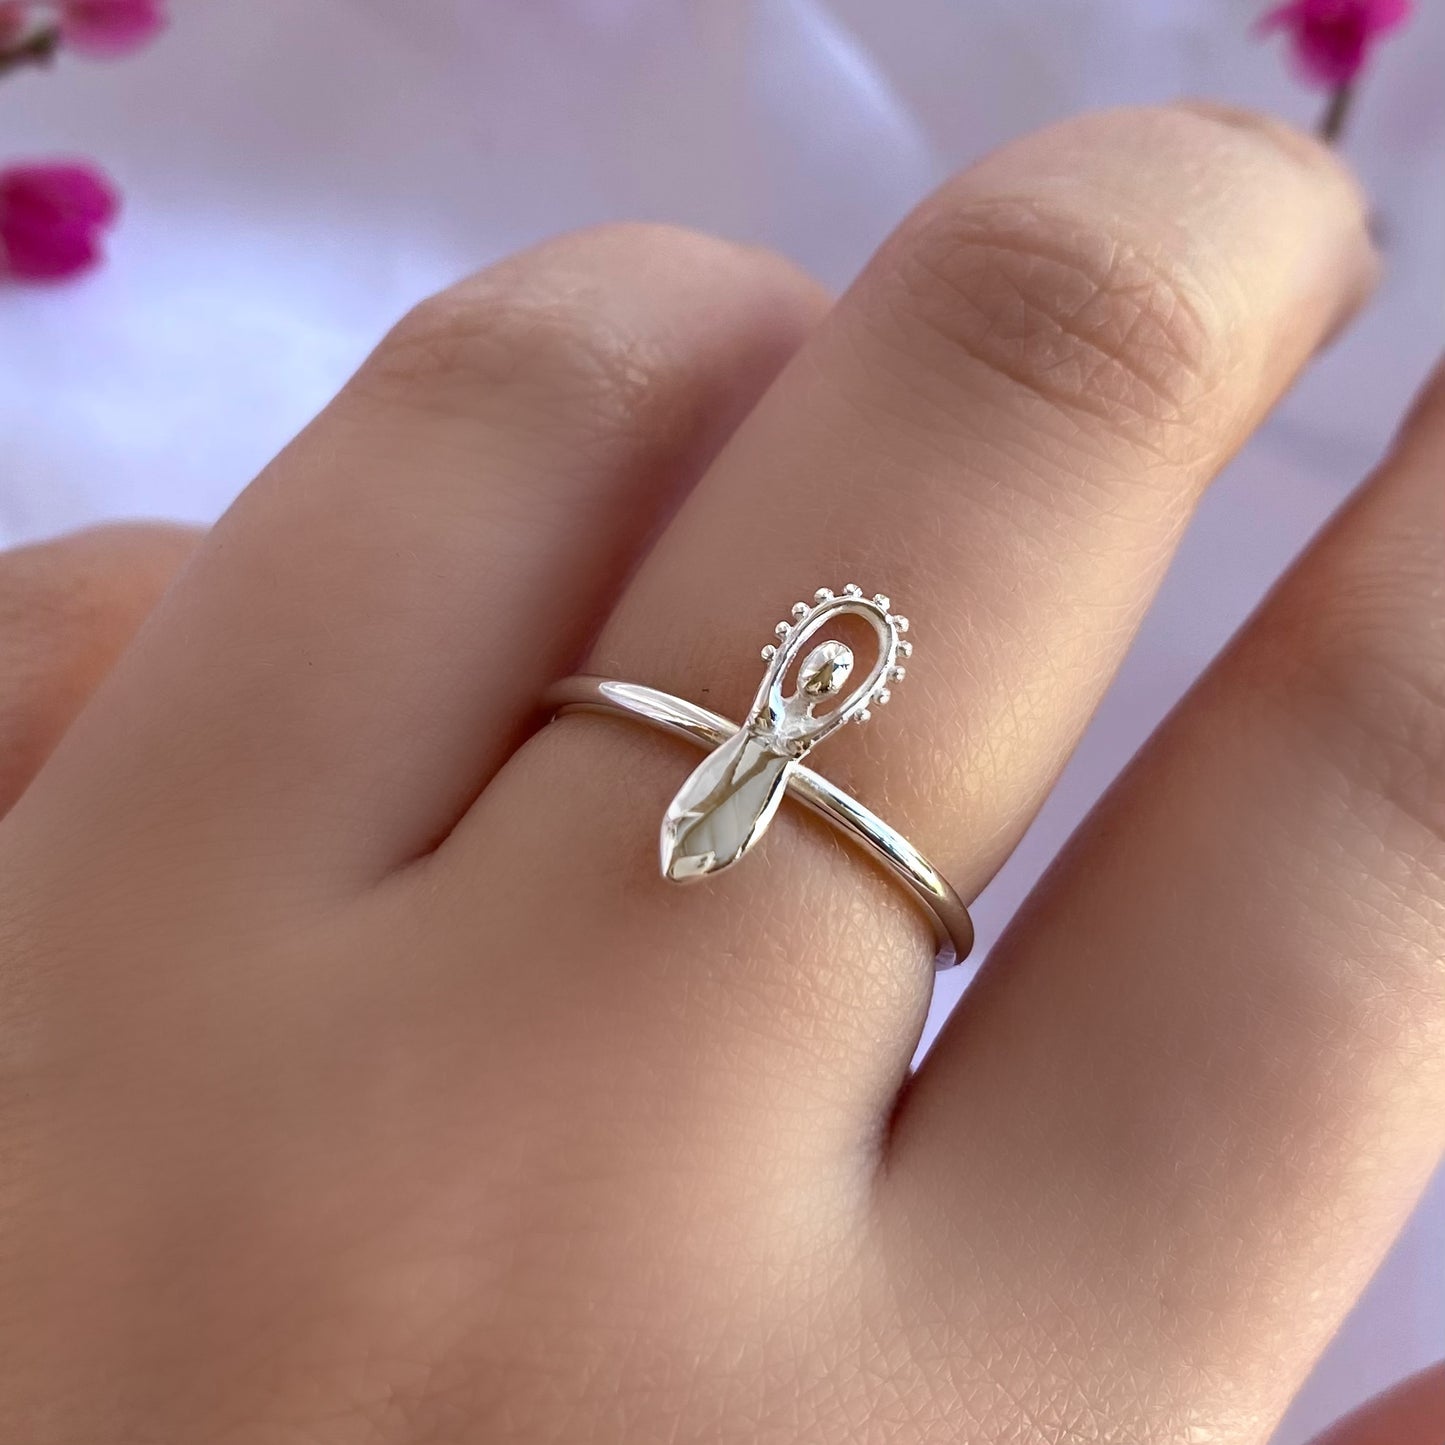 Made for a Goddess dainty ring